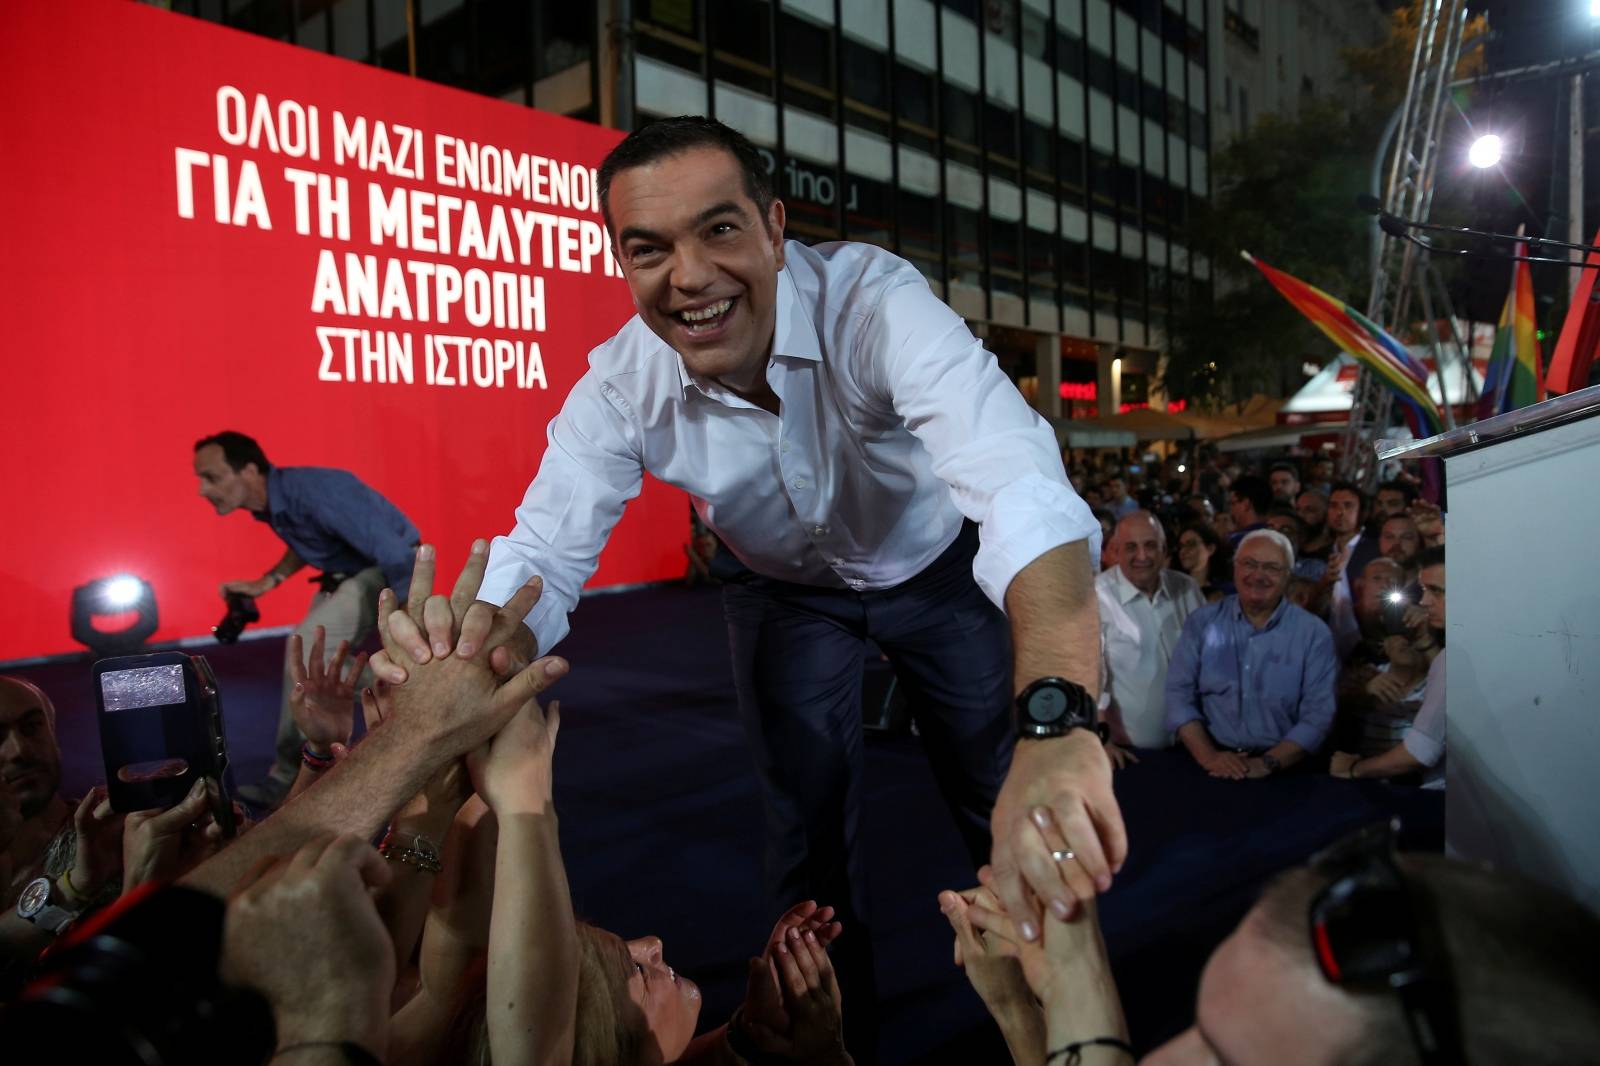 Greek PM and leader of leftist Syriza party Tsipras greets supporters before his speech during a pre-election rally in Athens